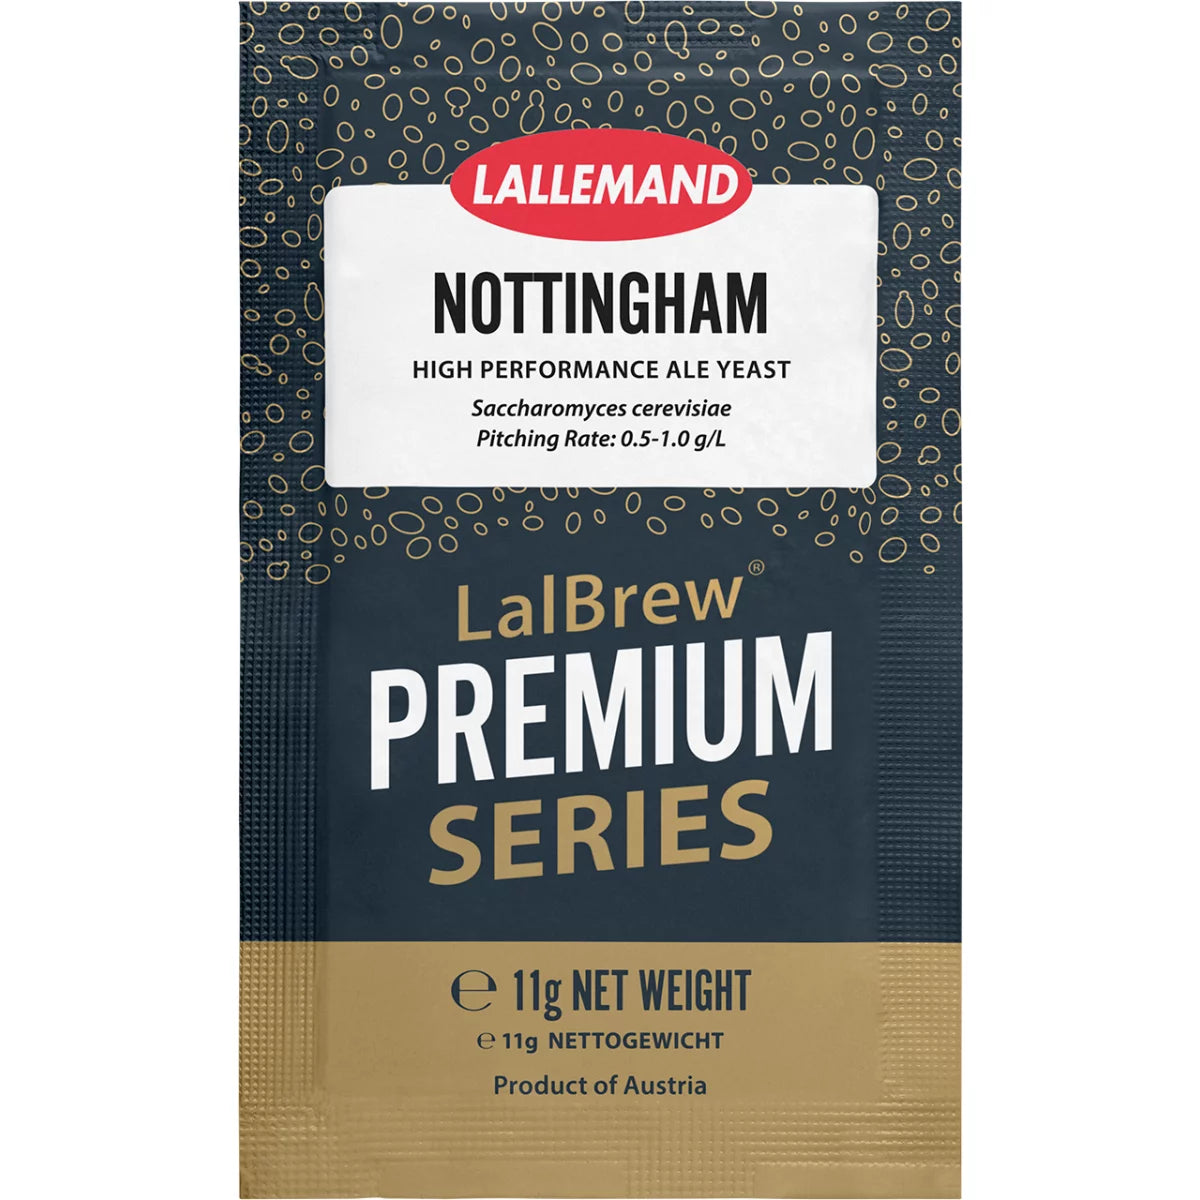 Lallemand Nottingham High Performance Ale Yeast